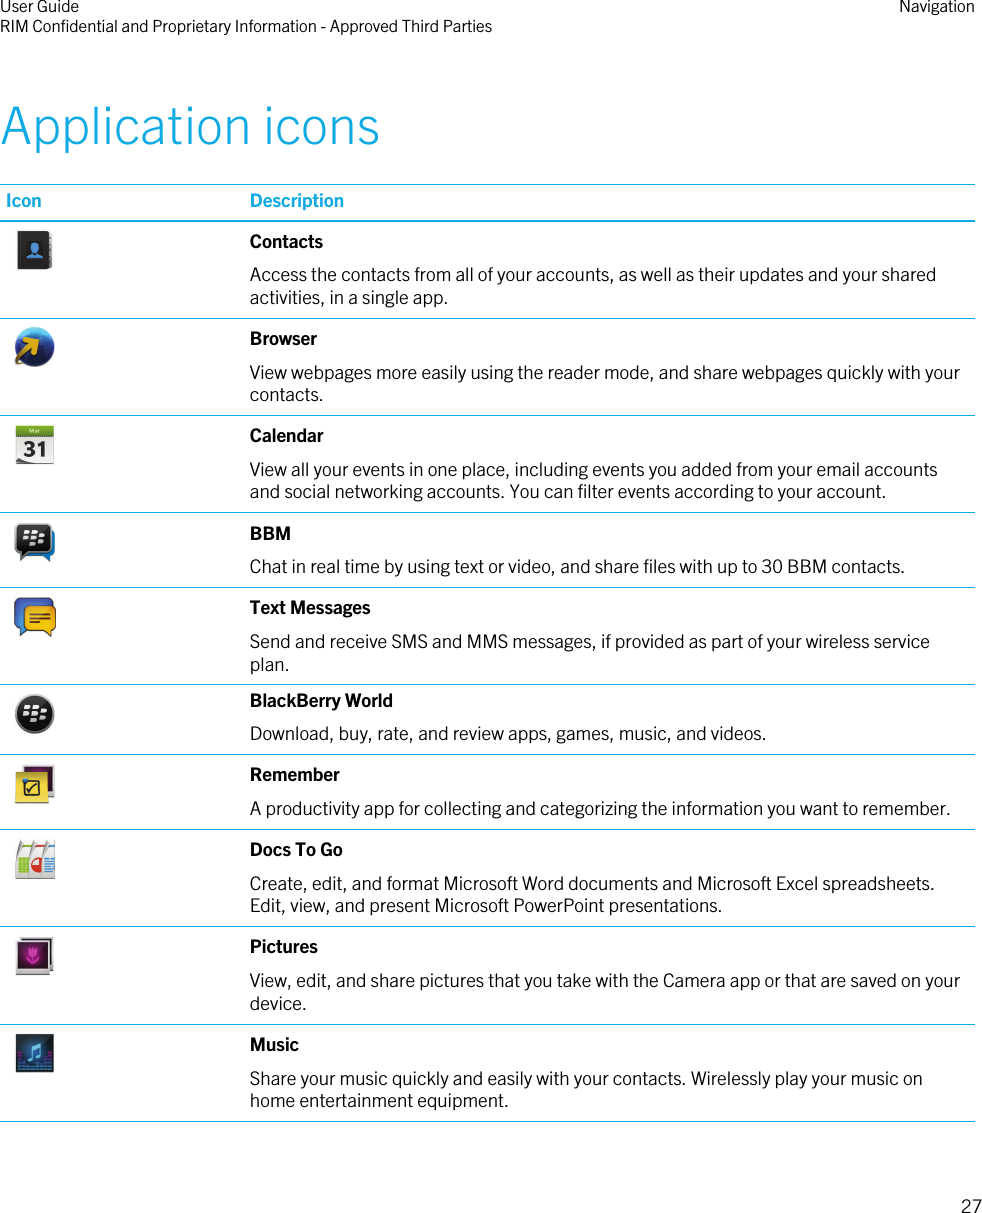 Application iconsIcon Description ContactsAccess the contacts from all of your accounts, as well as their updates and your sharedactivities, in a single app. BrowserView webpages more easily using the reader mode, and share webpages quickly with yourcontacts. CalendarView all your events in one place, including events you added from your email accountsand social networking accounts. You can filter events according to your account. BBMChat in real time by using text or video, and share files with up to 30 BBM contacts. Text MessagesSend and receive SMS and MMS messages, if provided as part of your wireless serviceplan. BlackBerry WorldDownload, buy, rate, and review apps, games, music, and videos. RememberA productivity app for collecting and categorizing the information you want to remember. Docs To GoCreate, edit, and format Microsoft Word documents and Microsoft Excel spreadsheets.Edit, view, and present Microsoft PowerPoint presentations. PicturesView, edit, and share pictures that you take with the Camera app or that are saved on yourdevice. MusicShare your music quickly and easily with your contacts. Wirelessly play your music onhome entertainment equipment.User GuideRIM Confidential and Proprietary Information - Approved Third Parties Navigation27